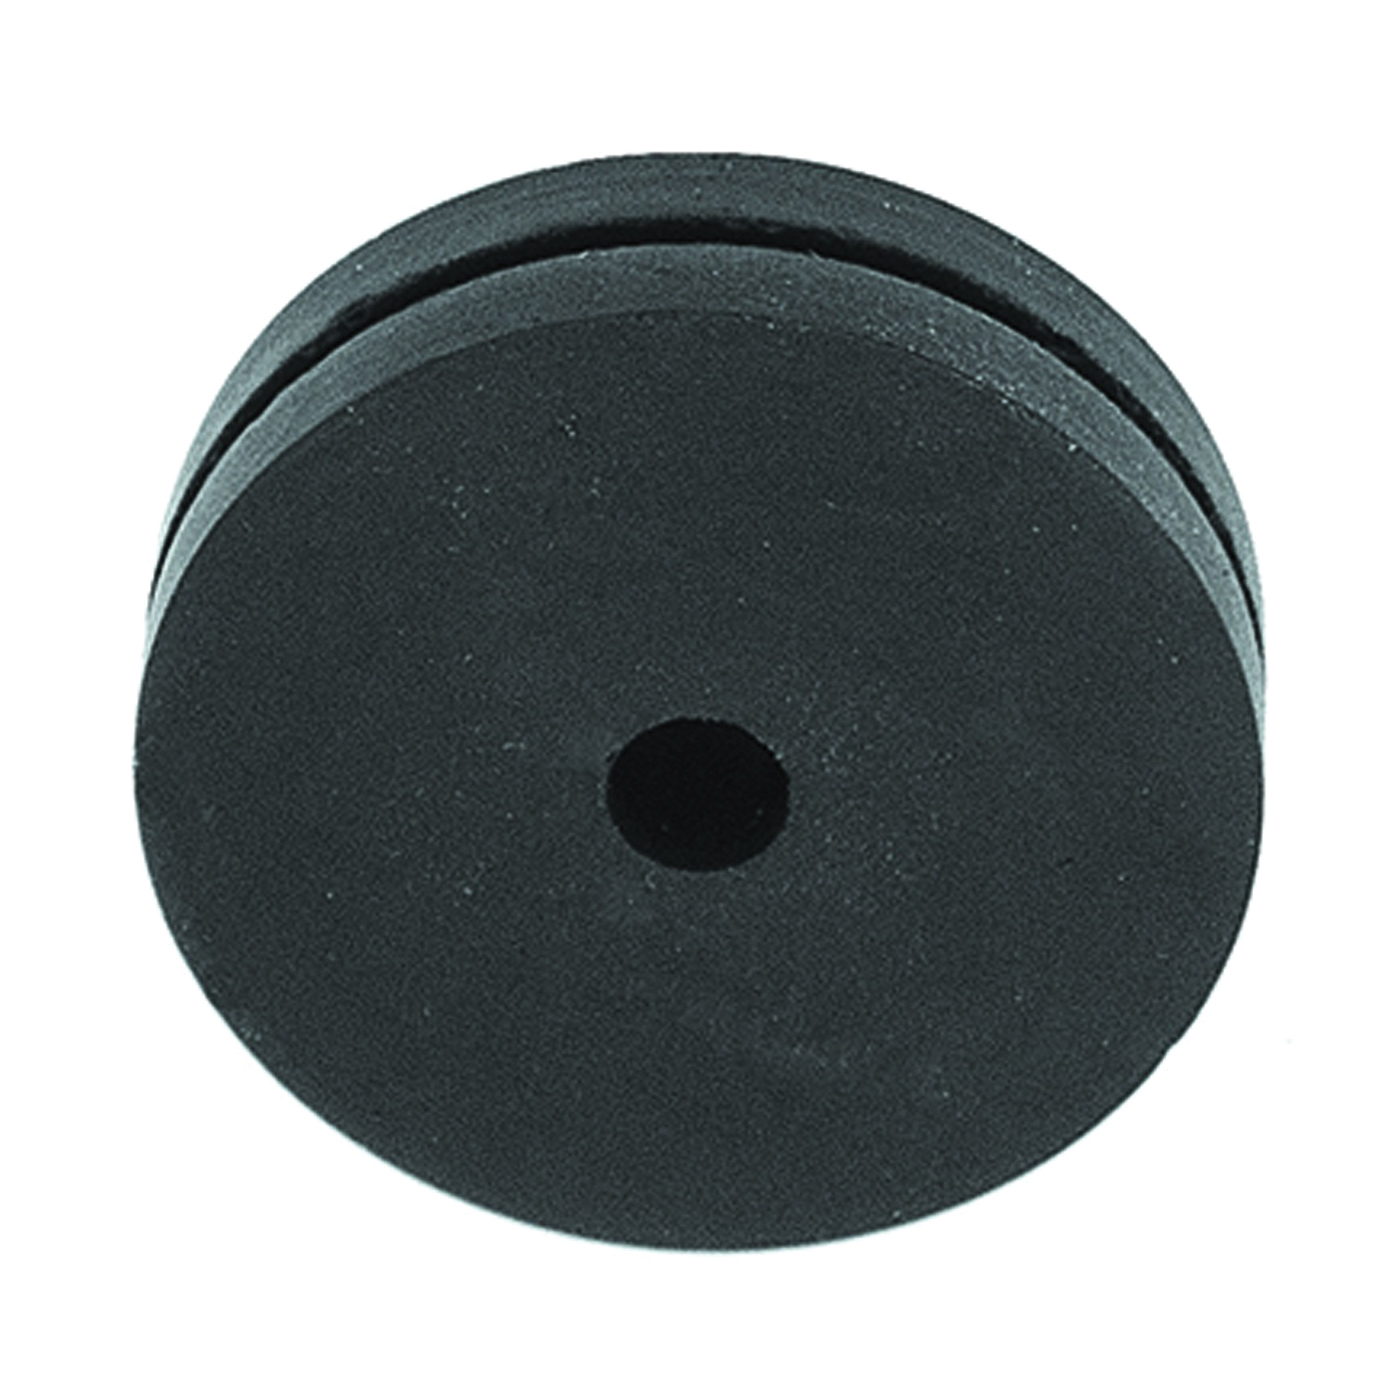 61513 Grommet, Rubber, Black, 7/16 in Thick Panel